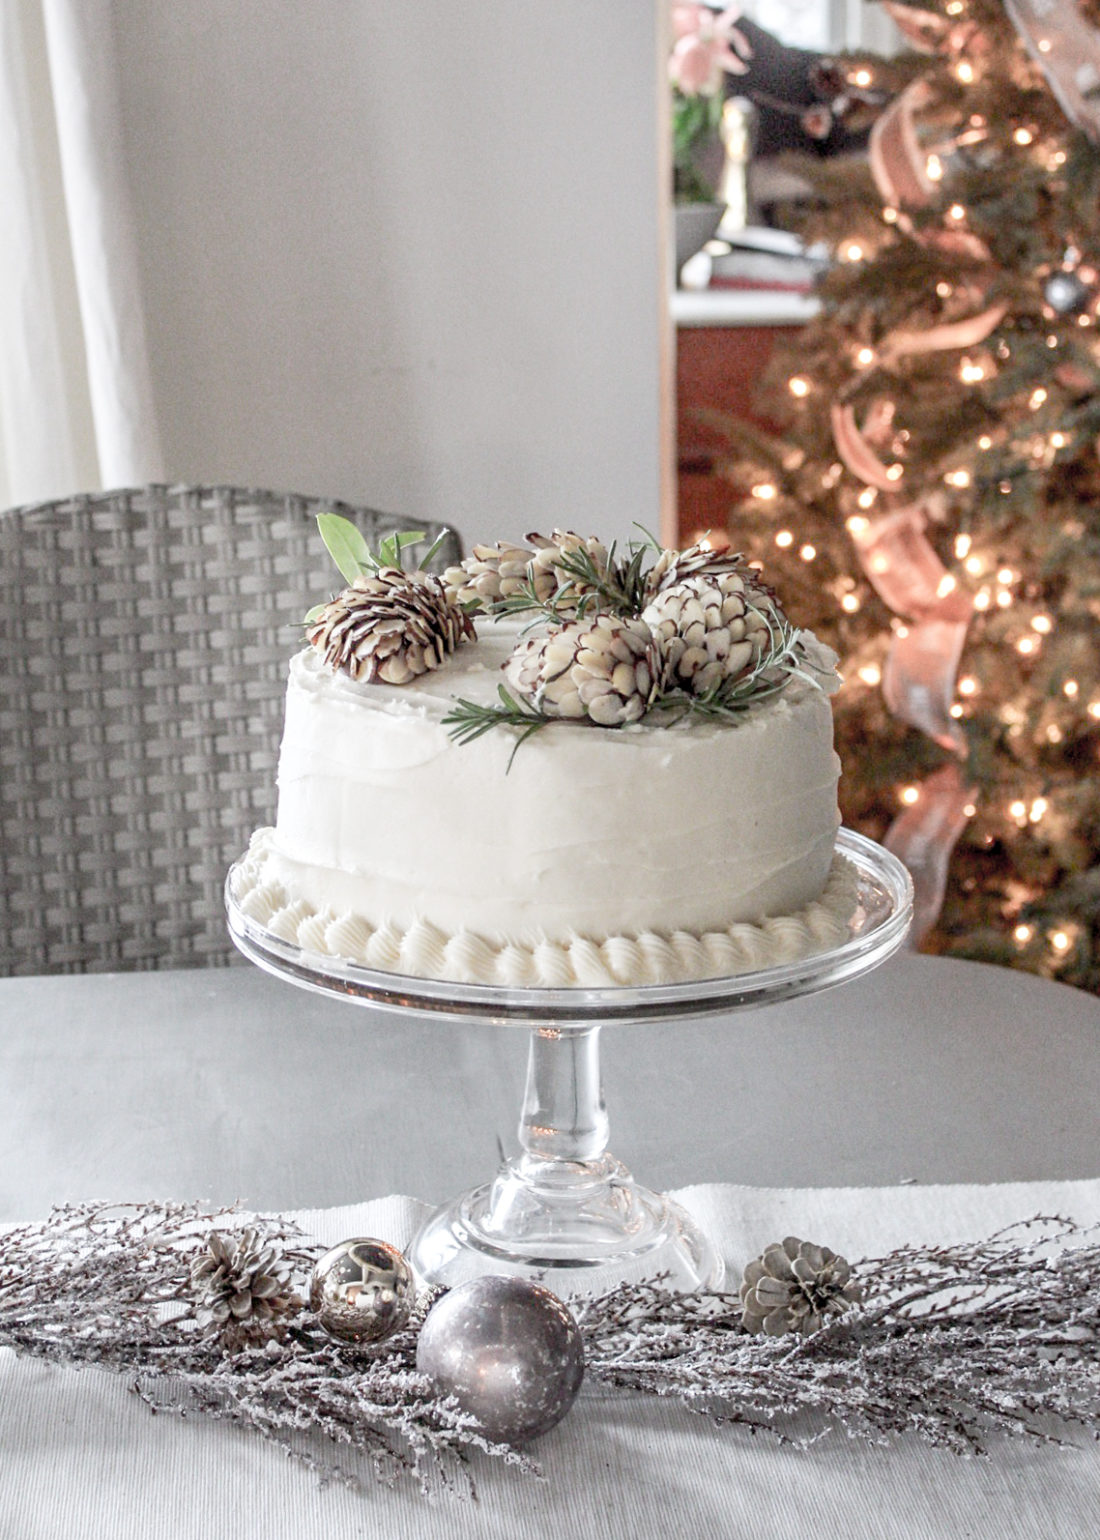 A Pine Cone Cake Creation for Winter Birthdays and Holidays - The ...